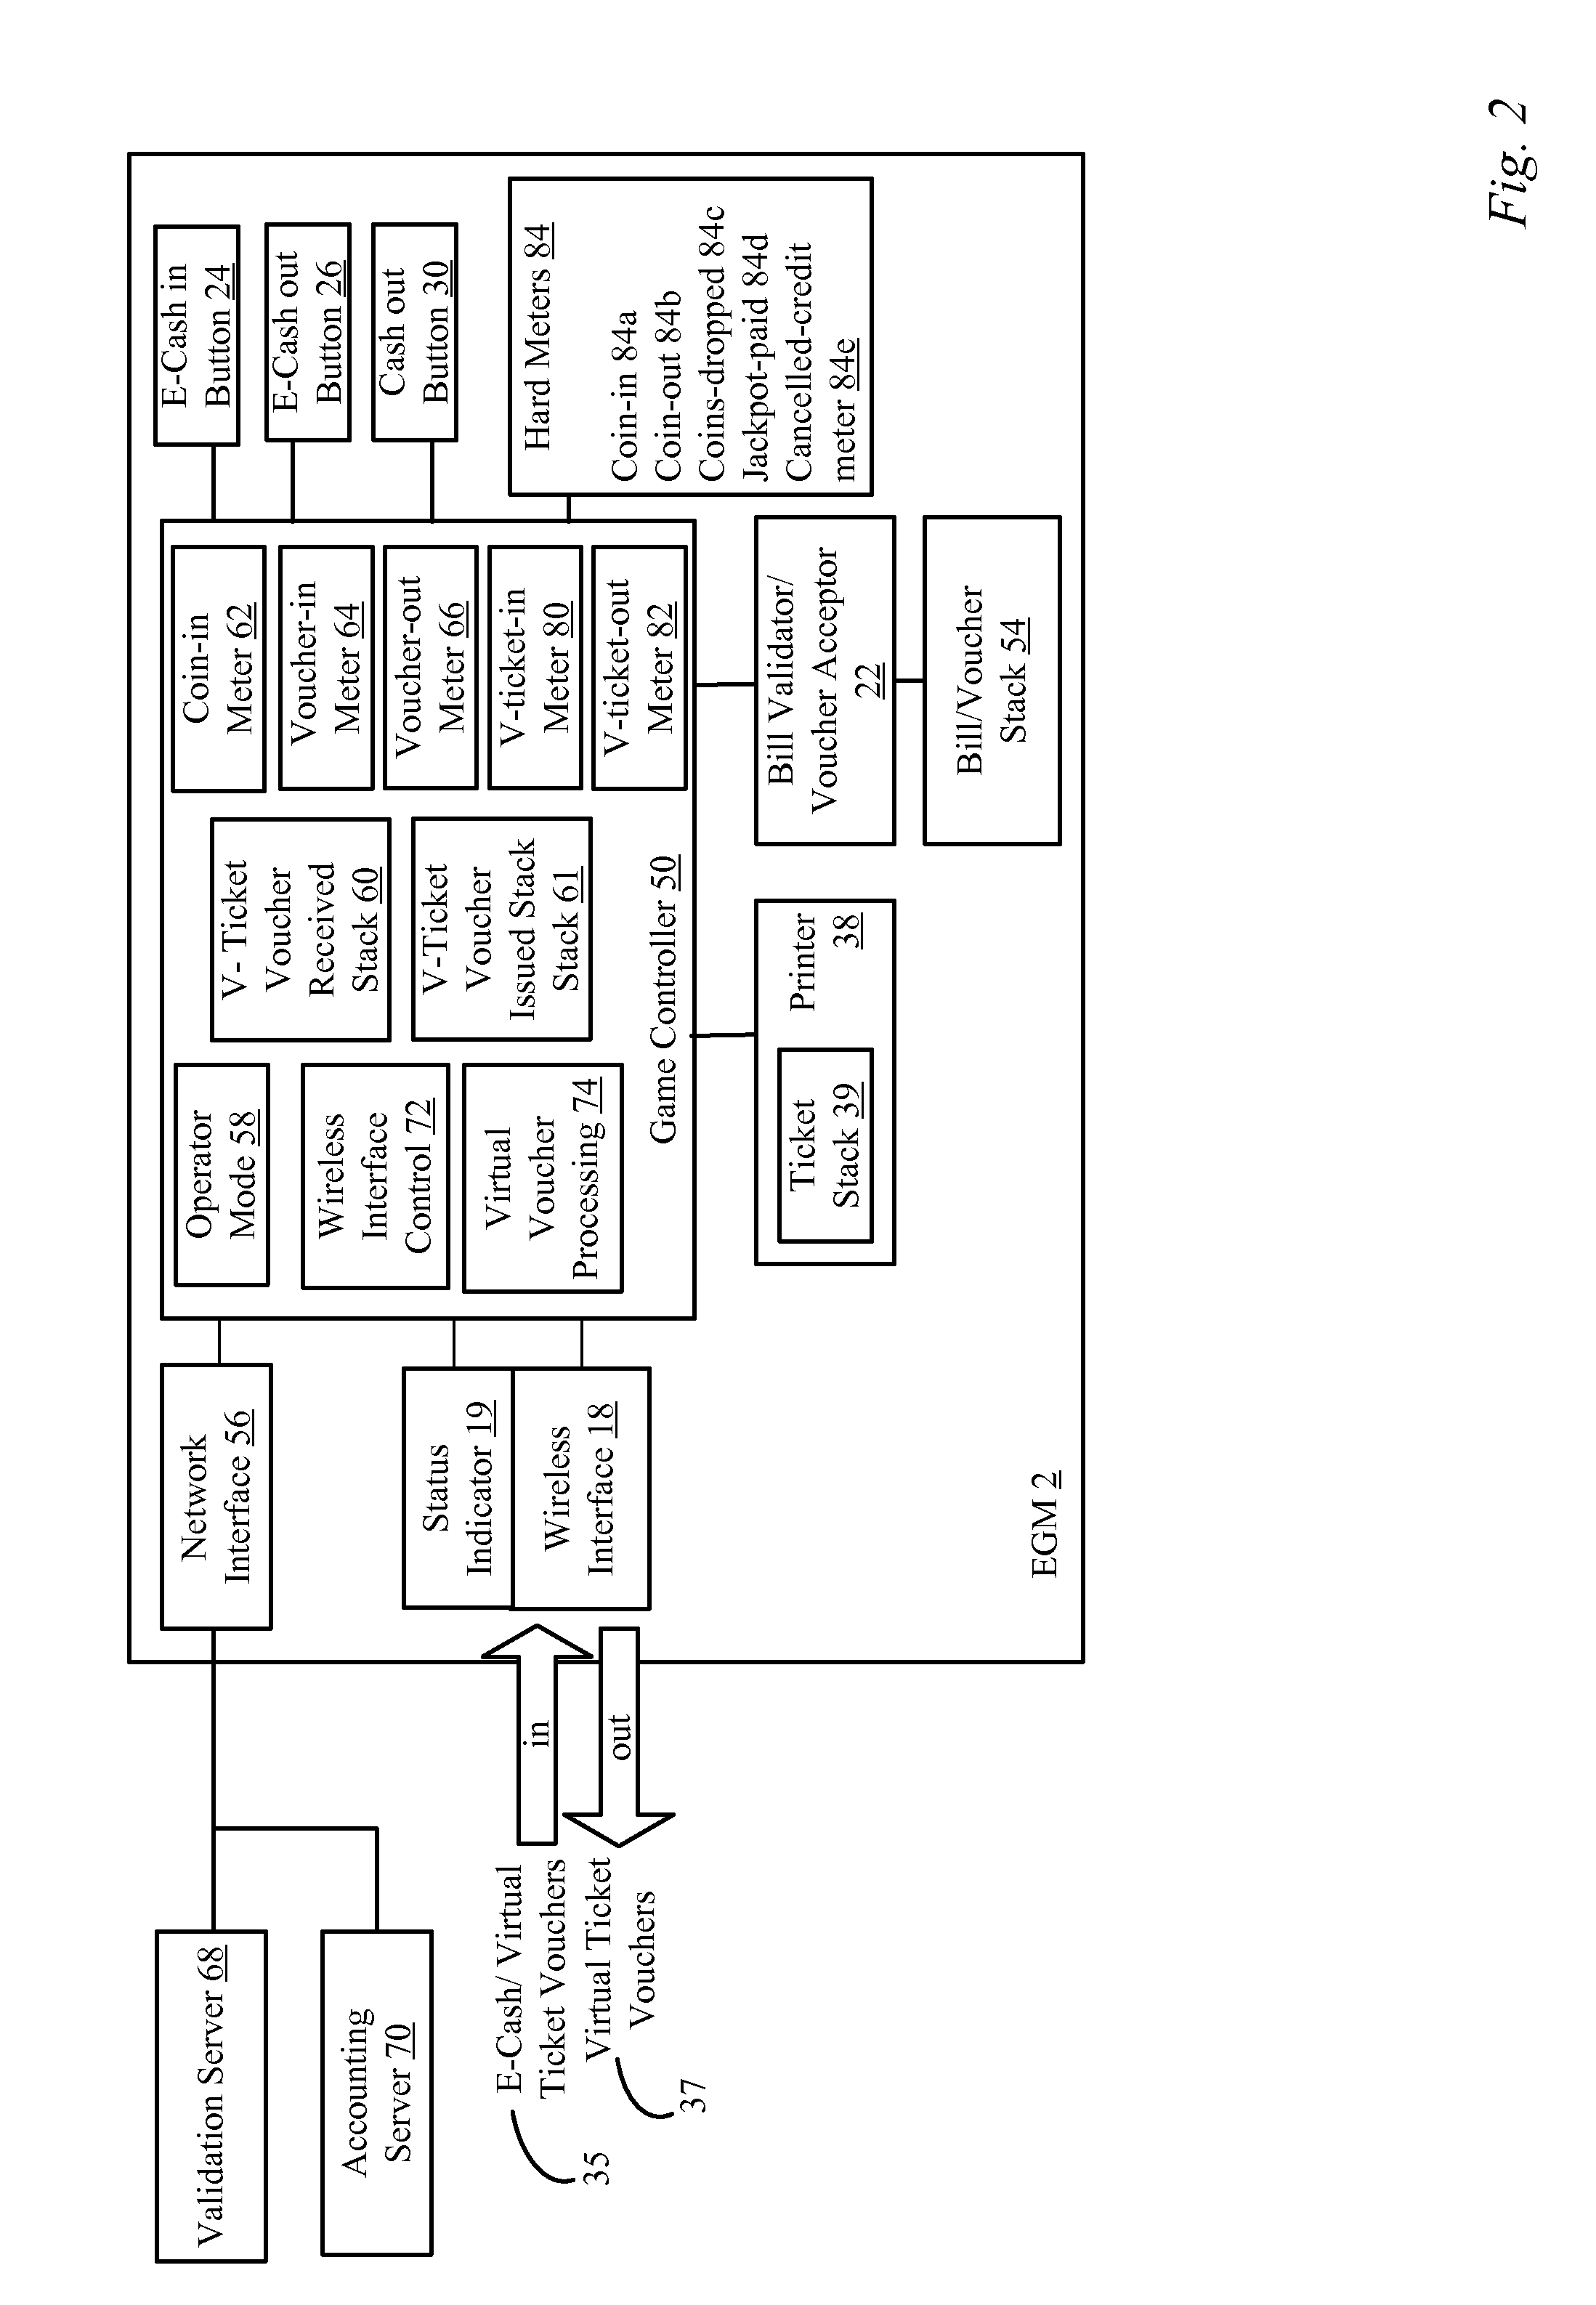 Bill acceptors and printers for providing virtual ticket-in and ticket-out on a gaming machine